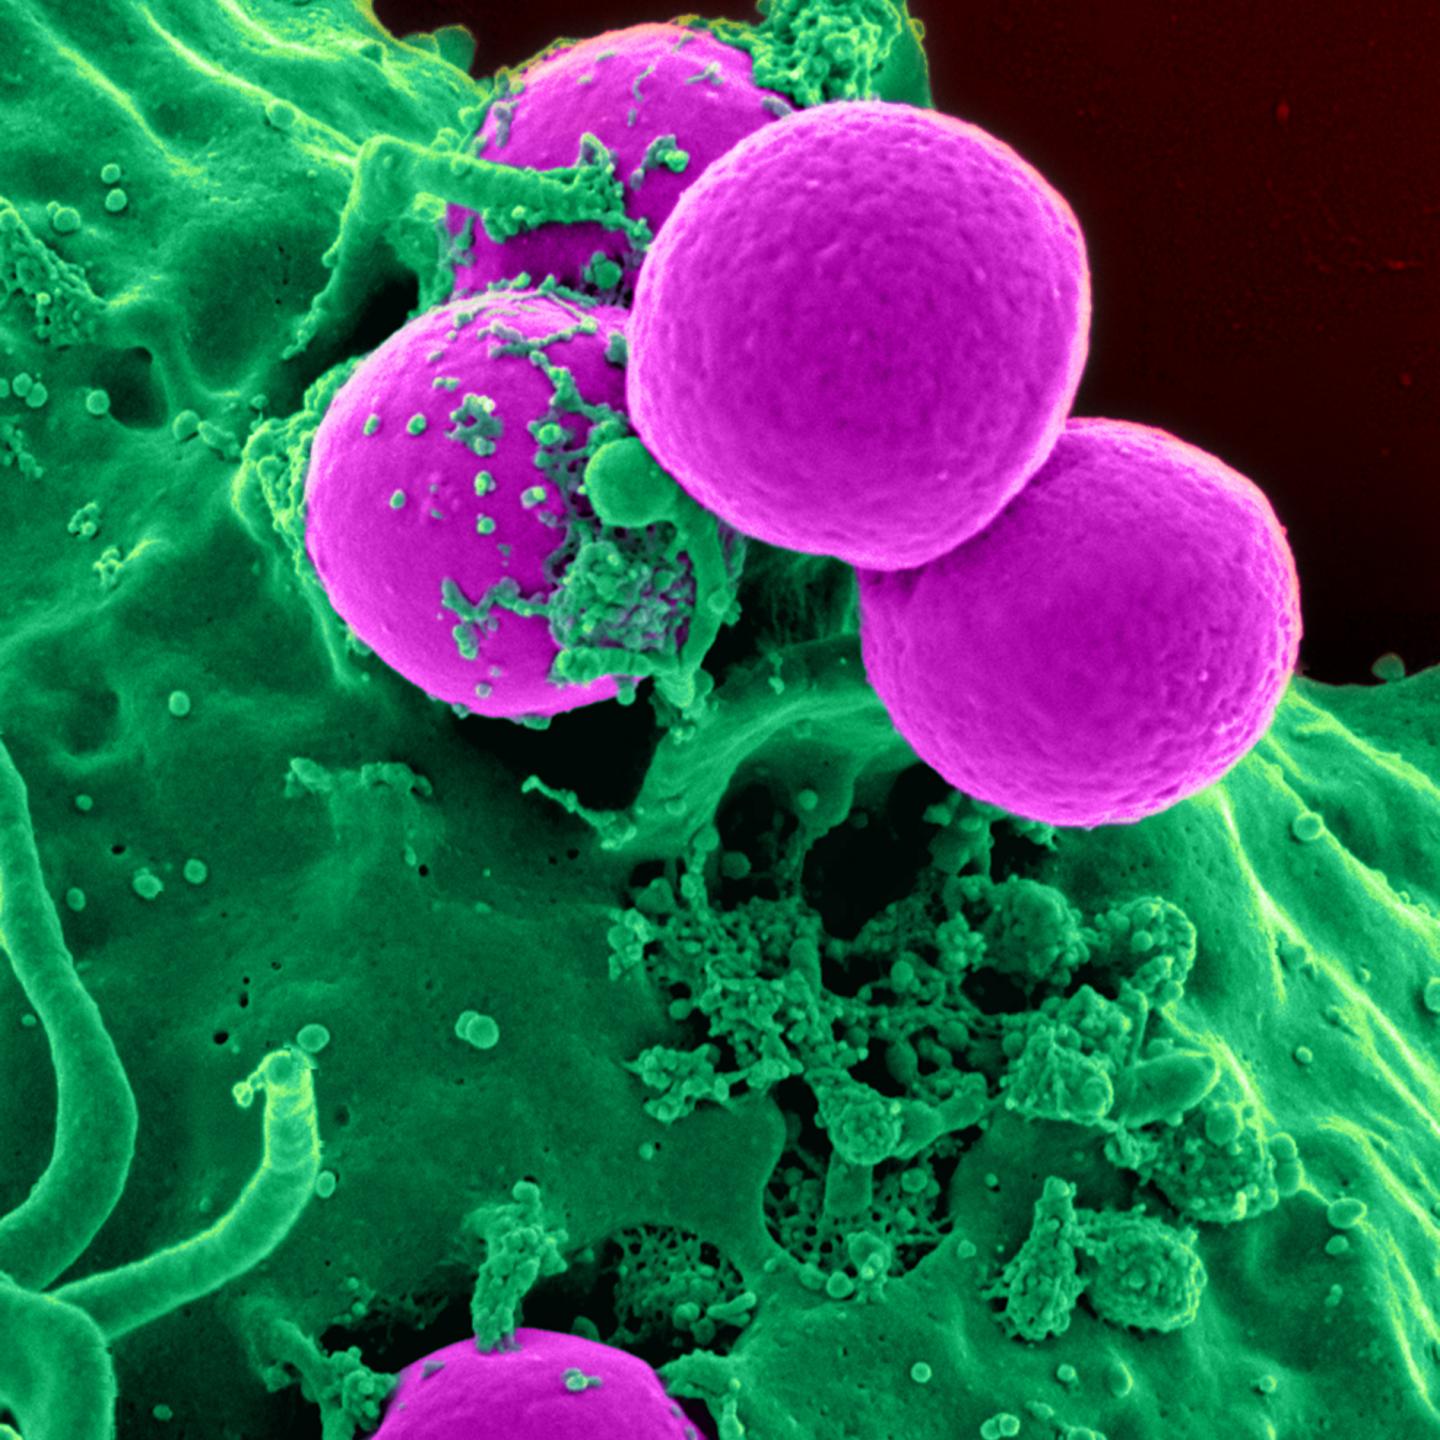 Antibiotic-Resistant Bacteria Are Responsible for a Global Health Crisis